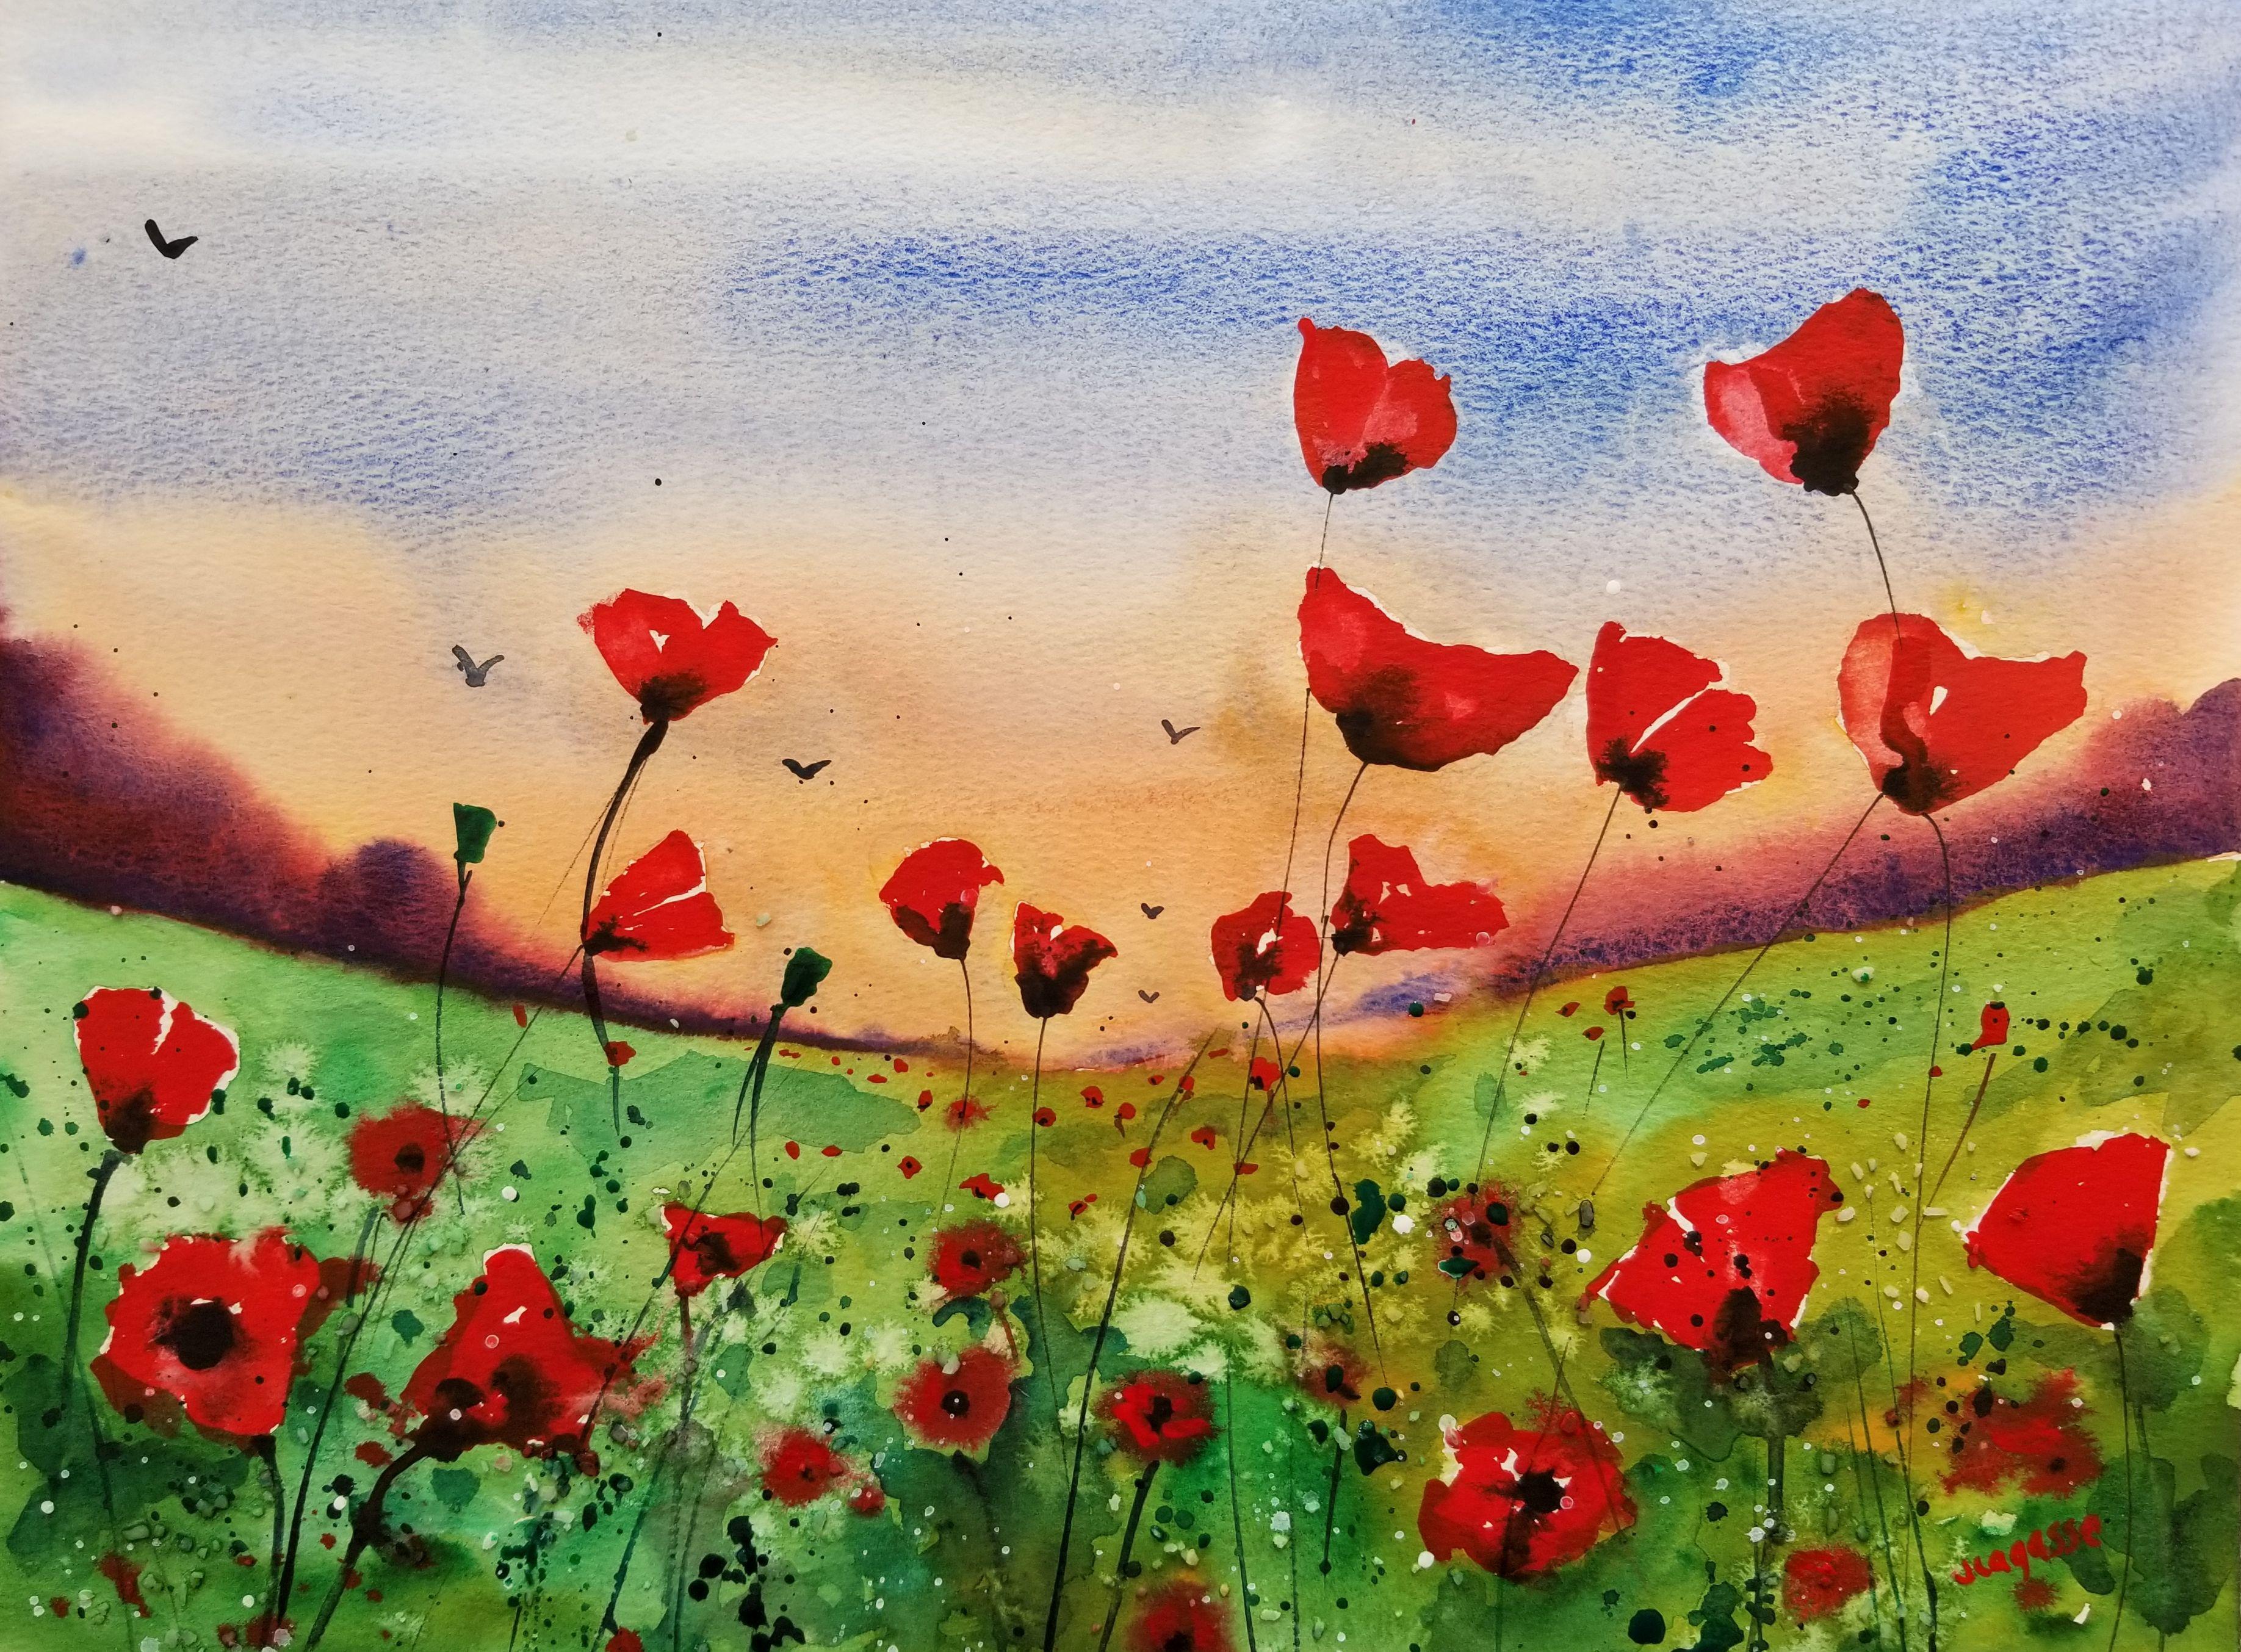 Poppy Fields, Painting, Watercolor on Watercolor Paper - Art by Jim Lagasse